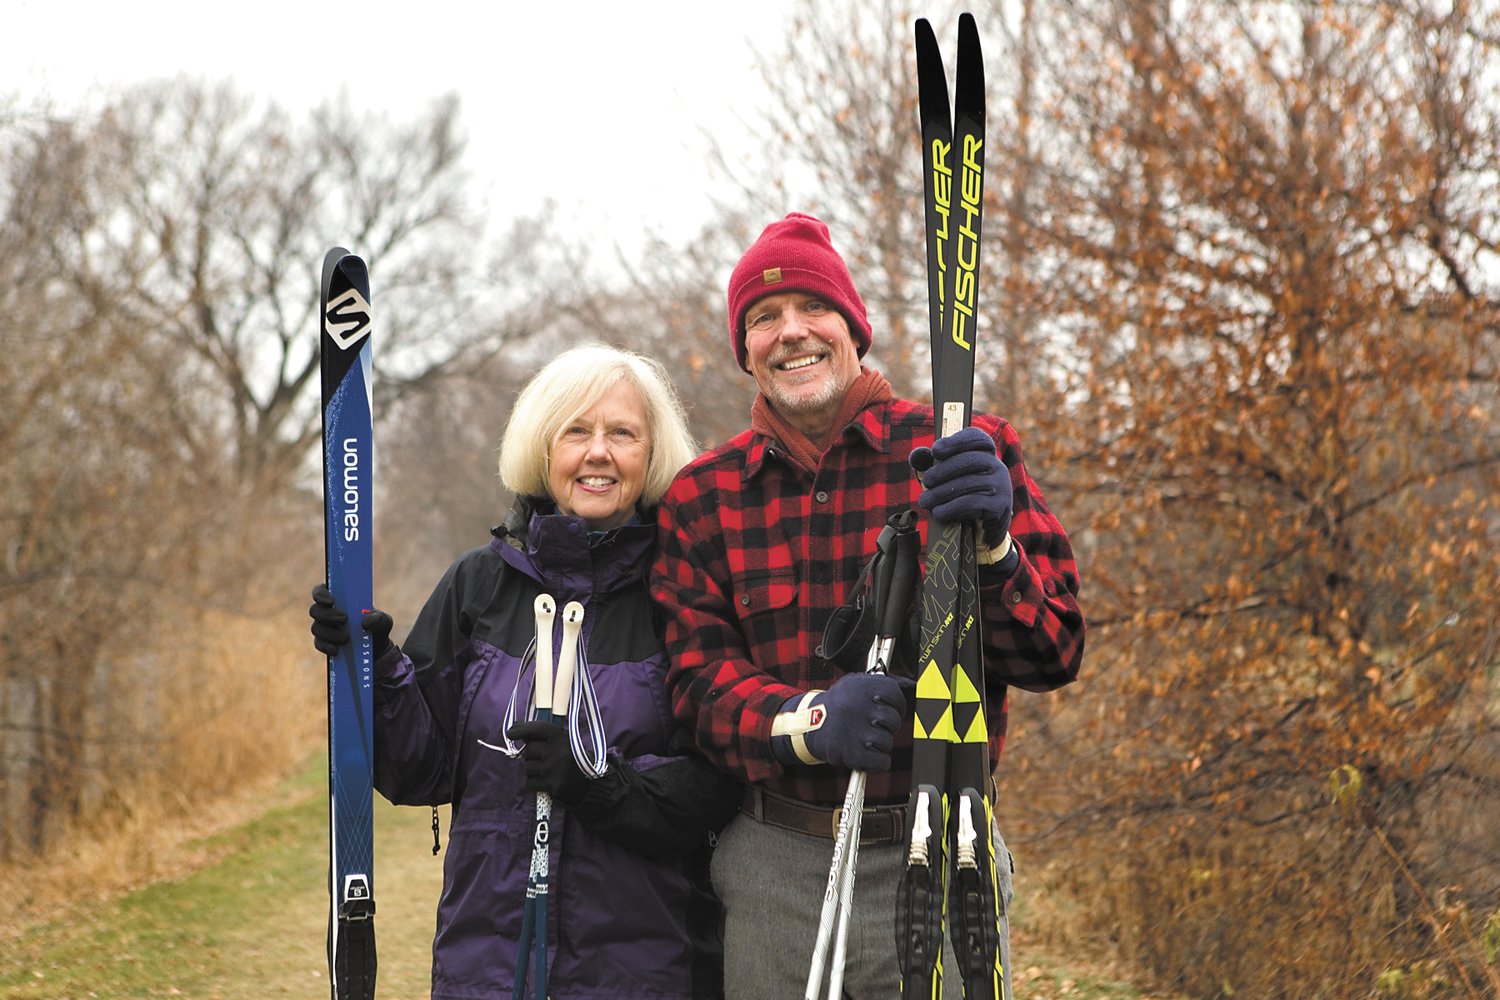 Linda Grieme (left) and Gregg Kelley (right) have been members of the NSSTC for decades. They’re drawn to others who love and value silent sports. They bought their home, in part, because of its proximity to the Hiawatha Golf Course – where they’ve already skied a few times this year. (Photo by Margie O’Loughlin)